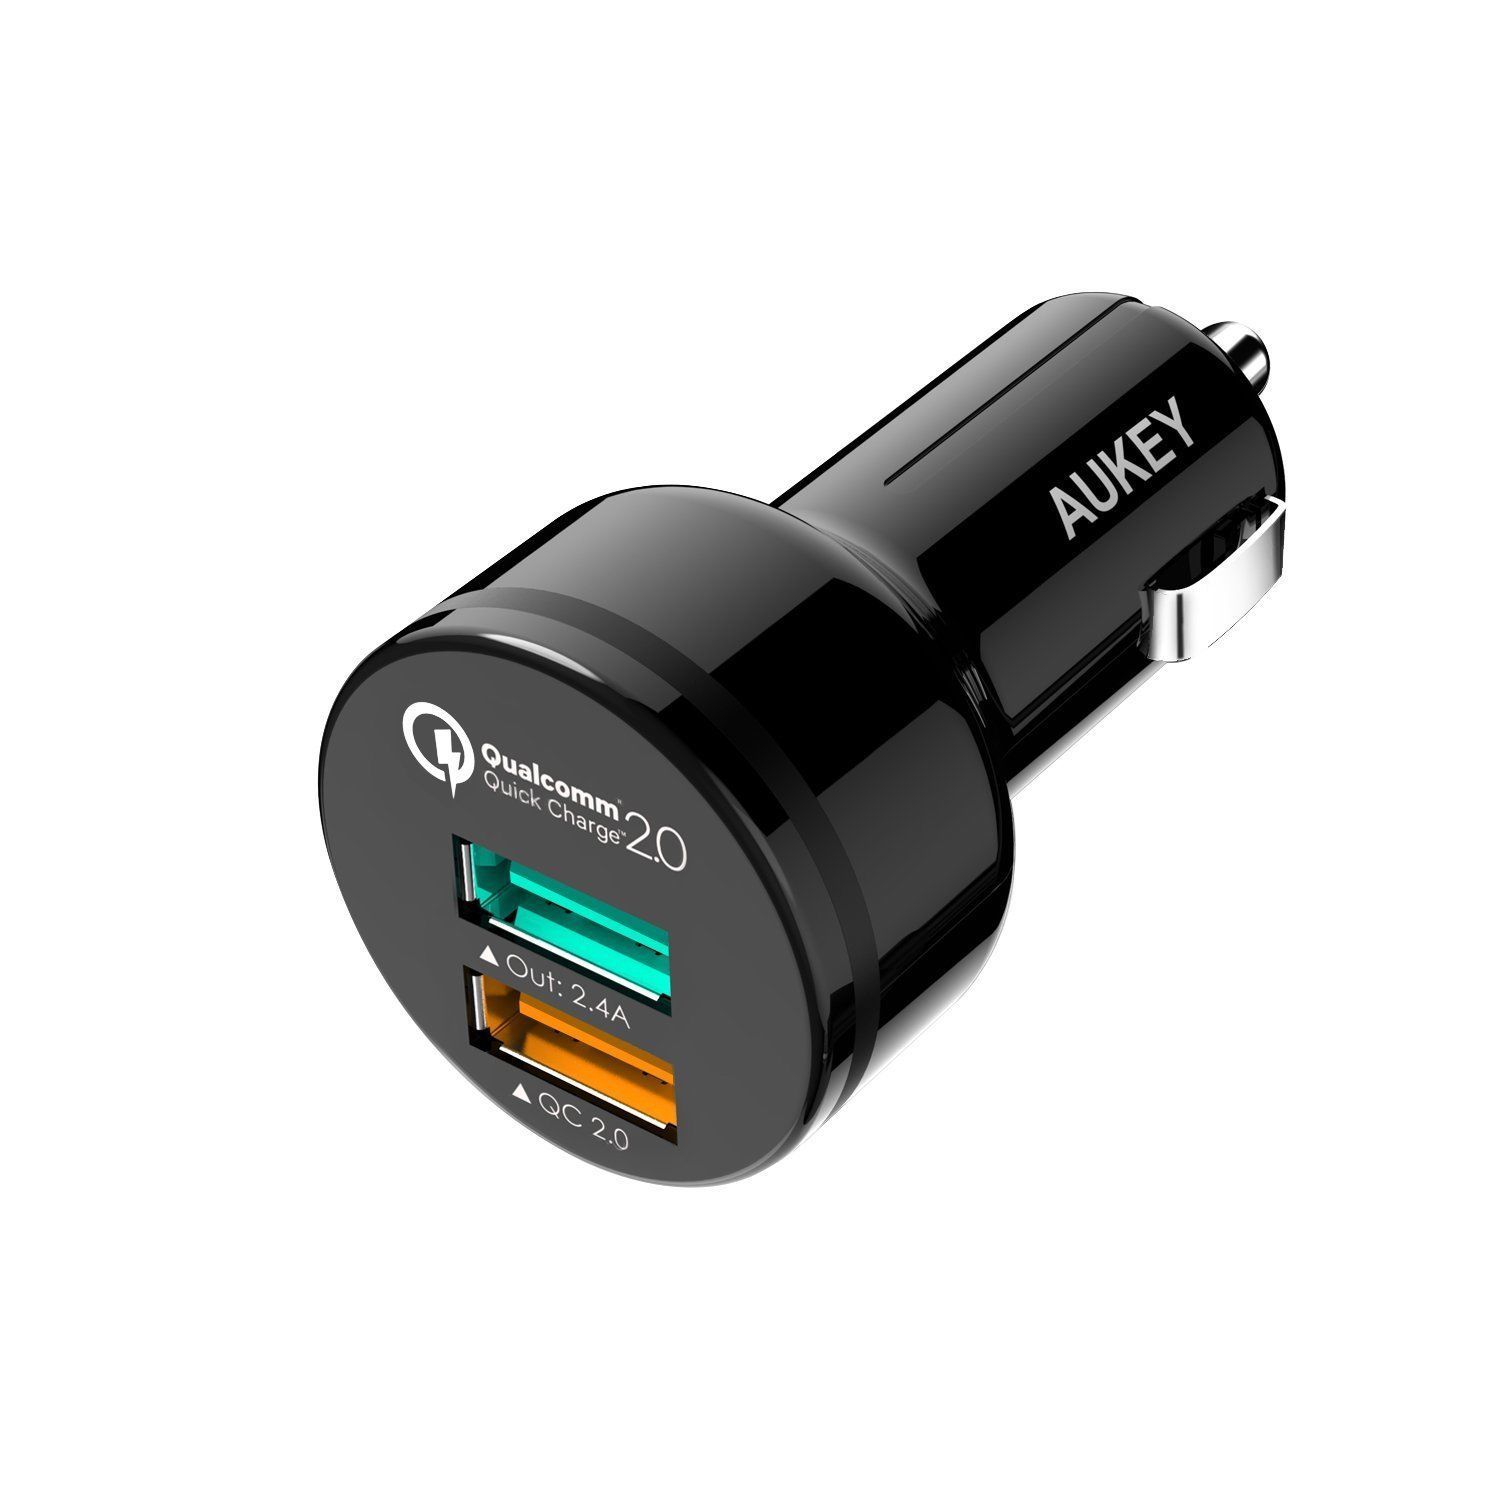 Aukey Car Charger with Quick Charge 2.0 Port for LG G4, Samsung Galaxy S7/S6/Edg - $20.78